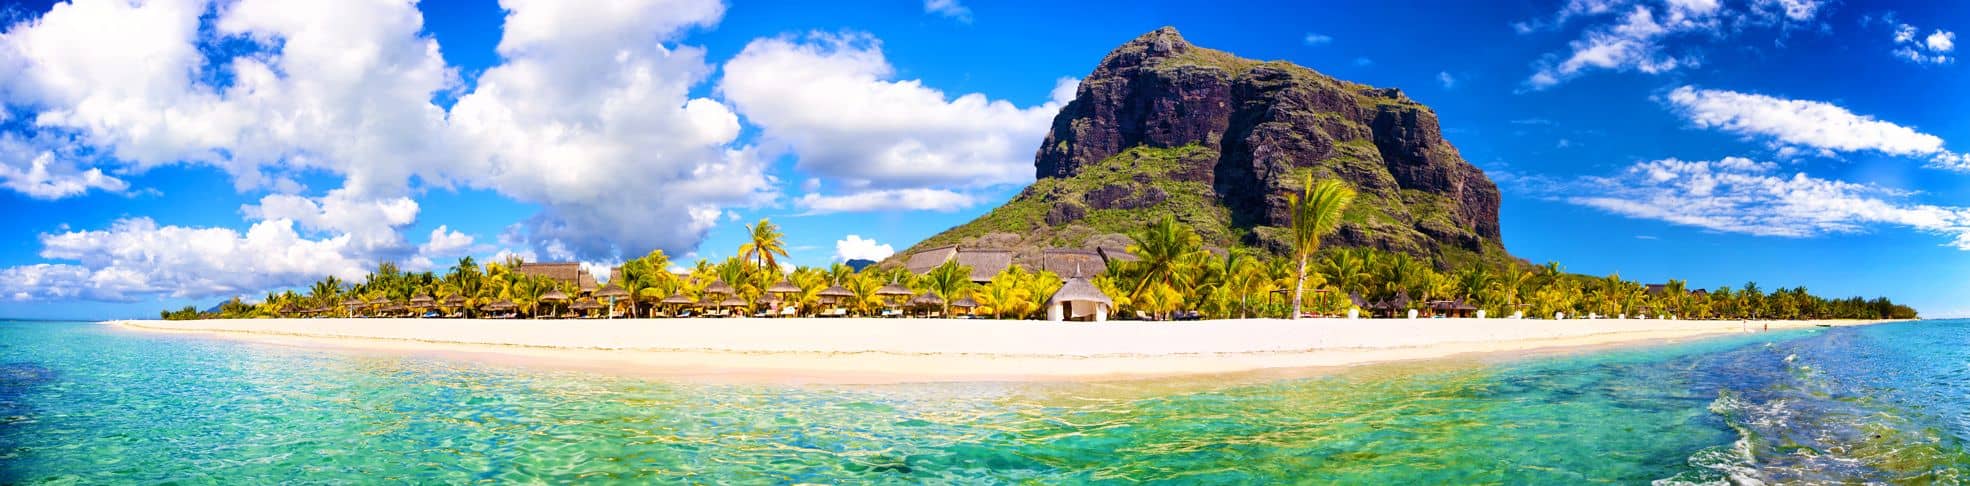 Cheap Mauritius Holidays 2020/2021 from £49 Deposit Only!